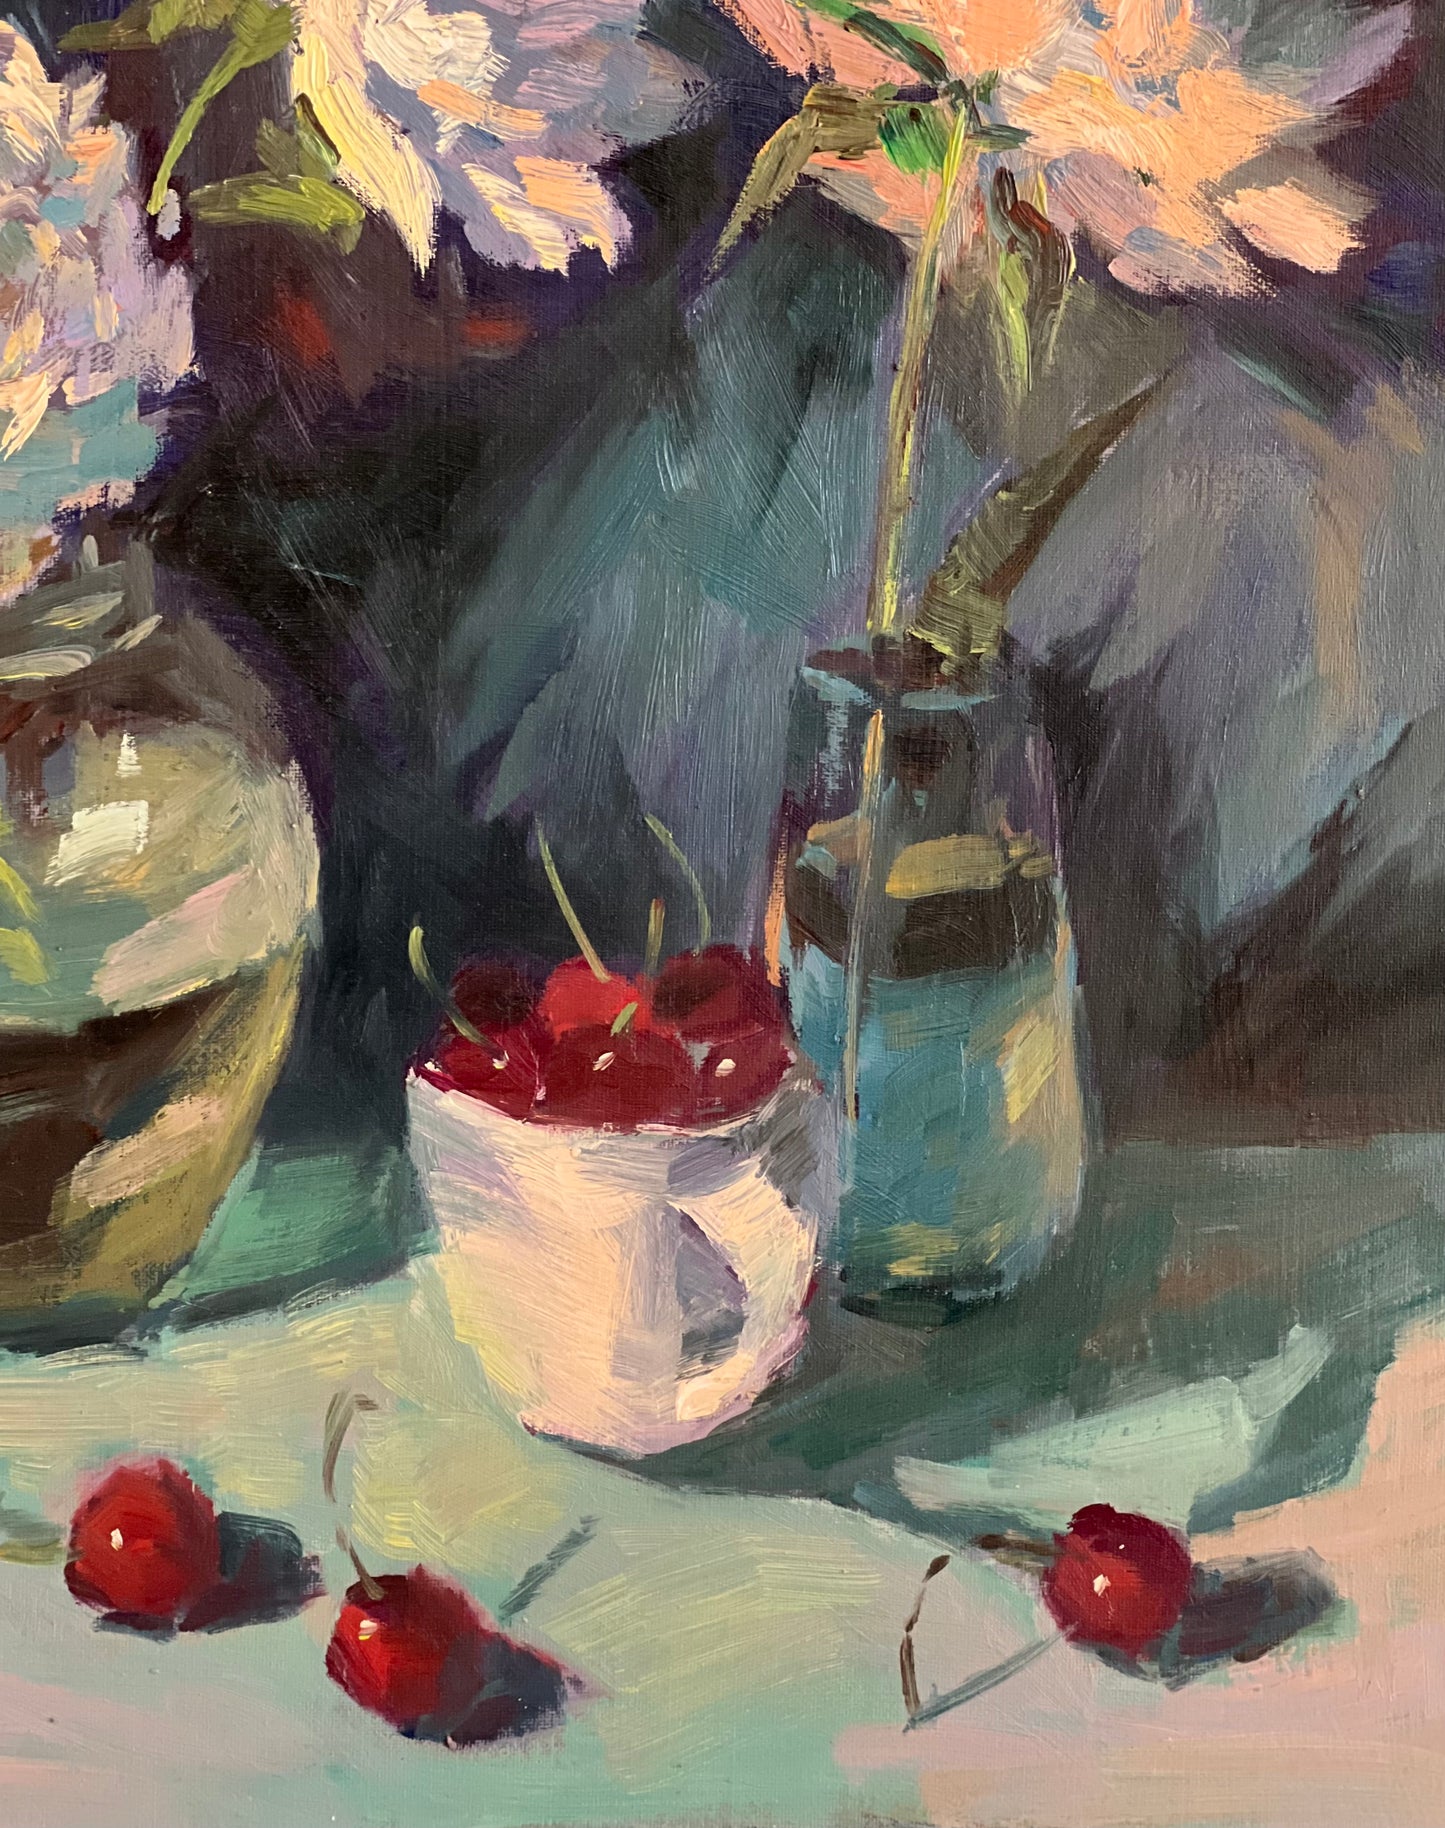 Peony Nocturne with Cherries!  - Large Original Oil Painting of Peony Flowers